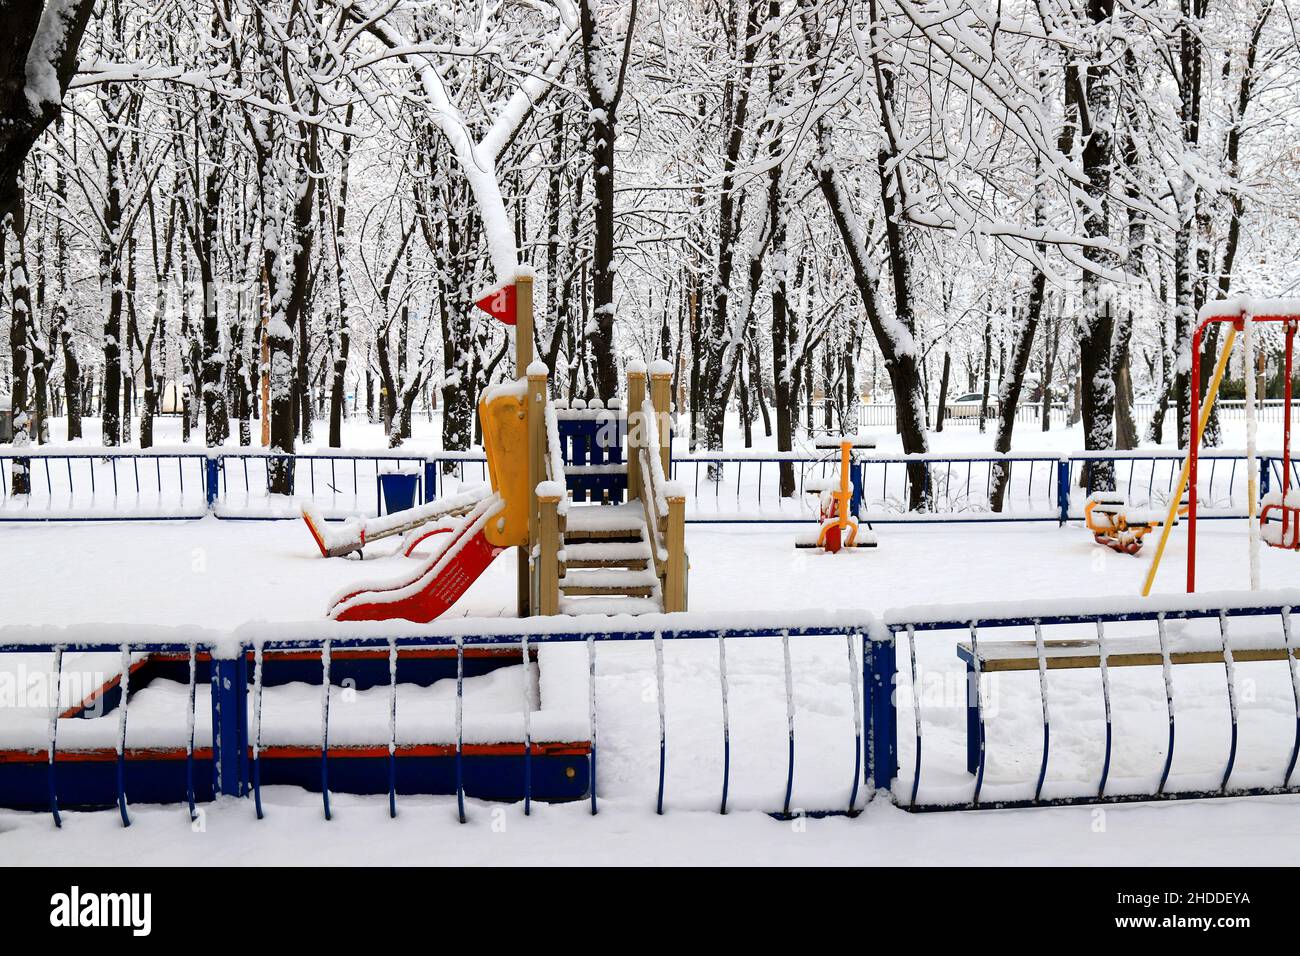 Winter park square with a children s playground, covered with snow. Children's slides and swings in winter. Dnipro, Dnipropetrovsk, Ukraine Stock Photo